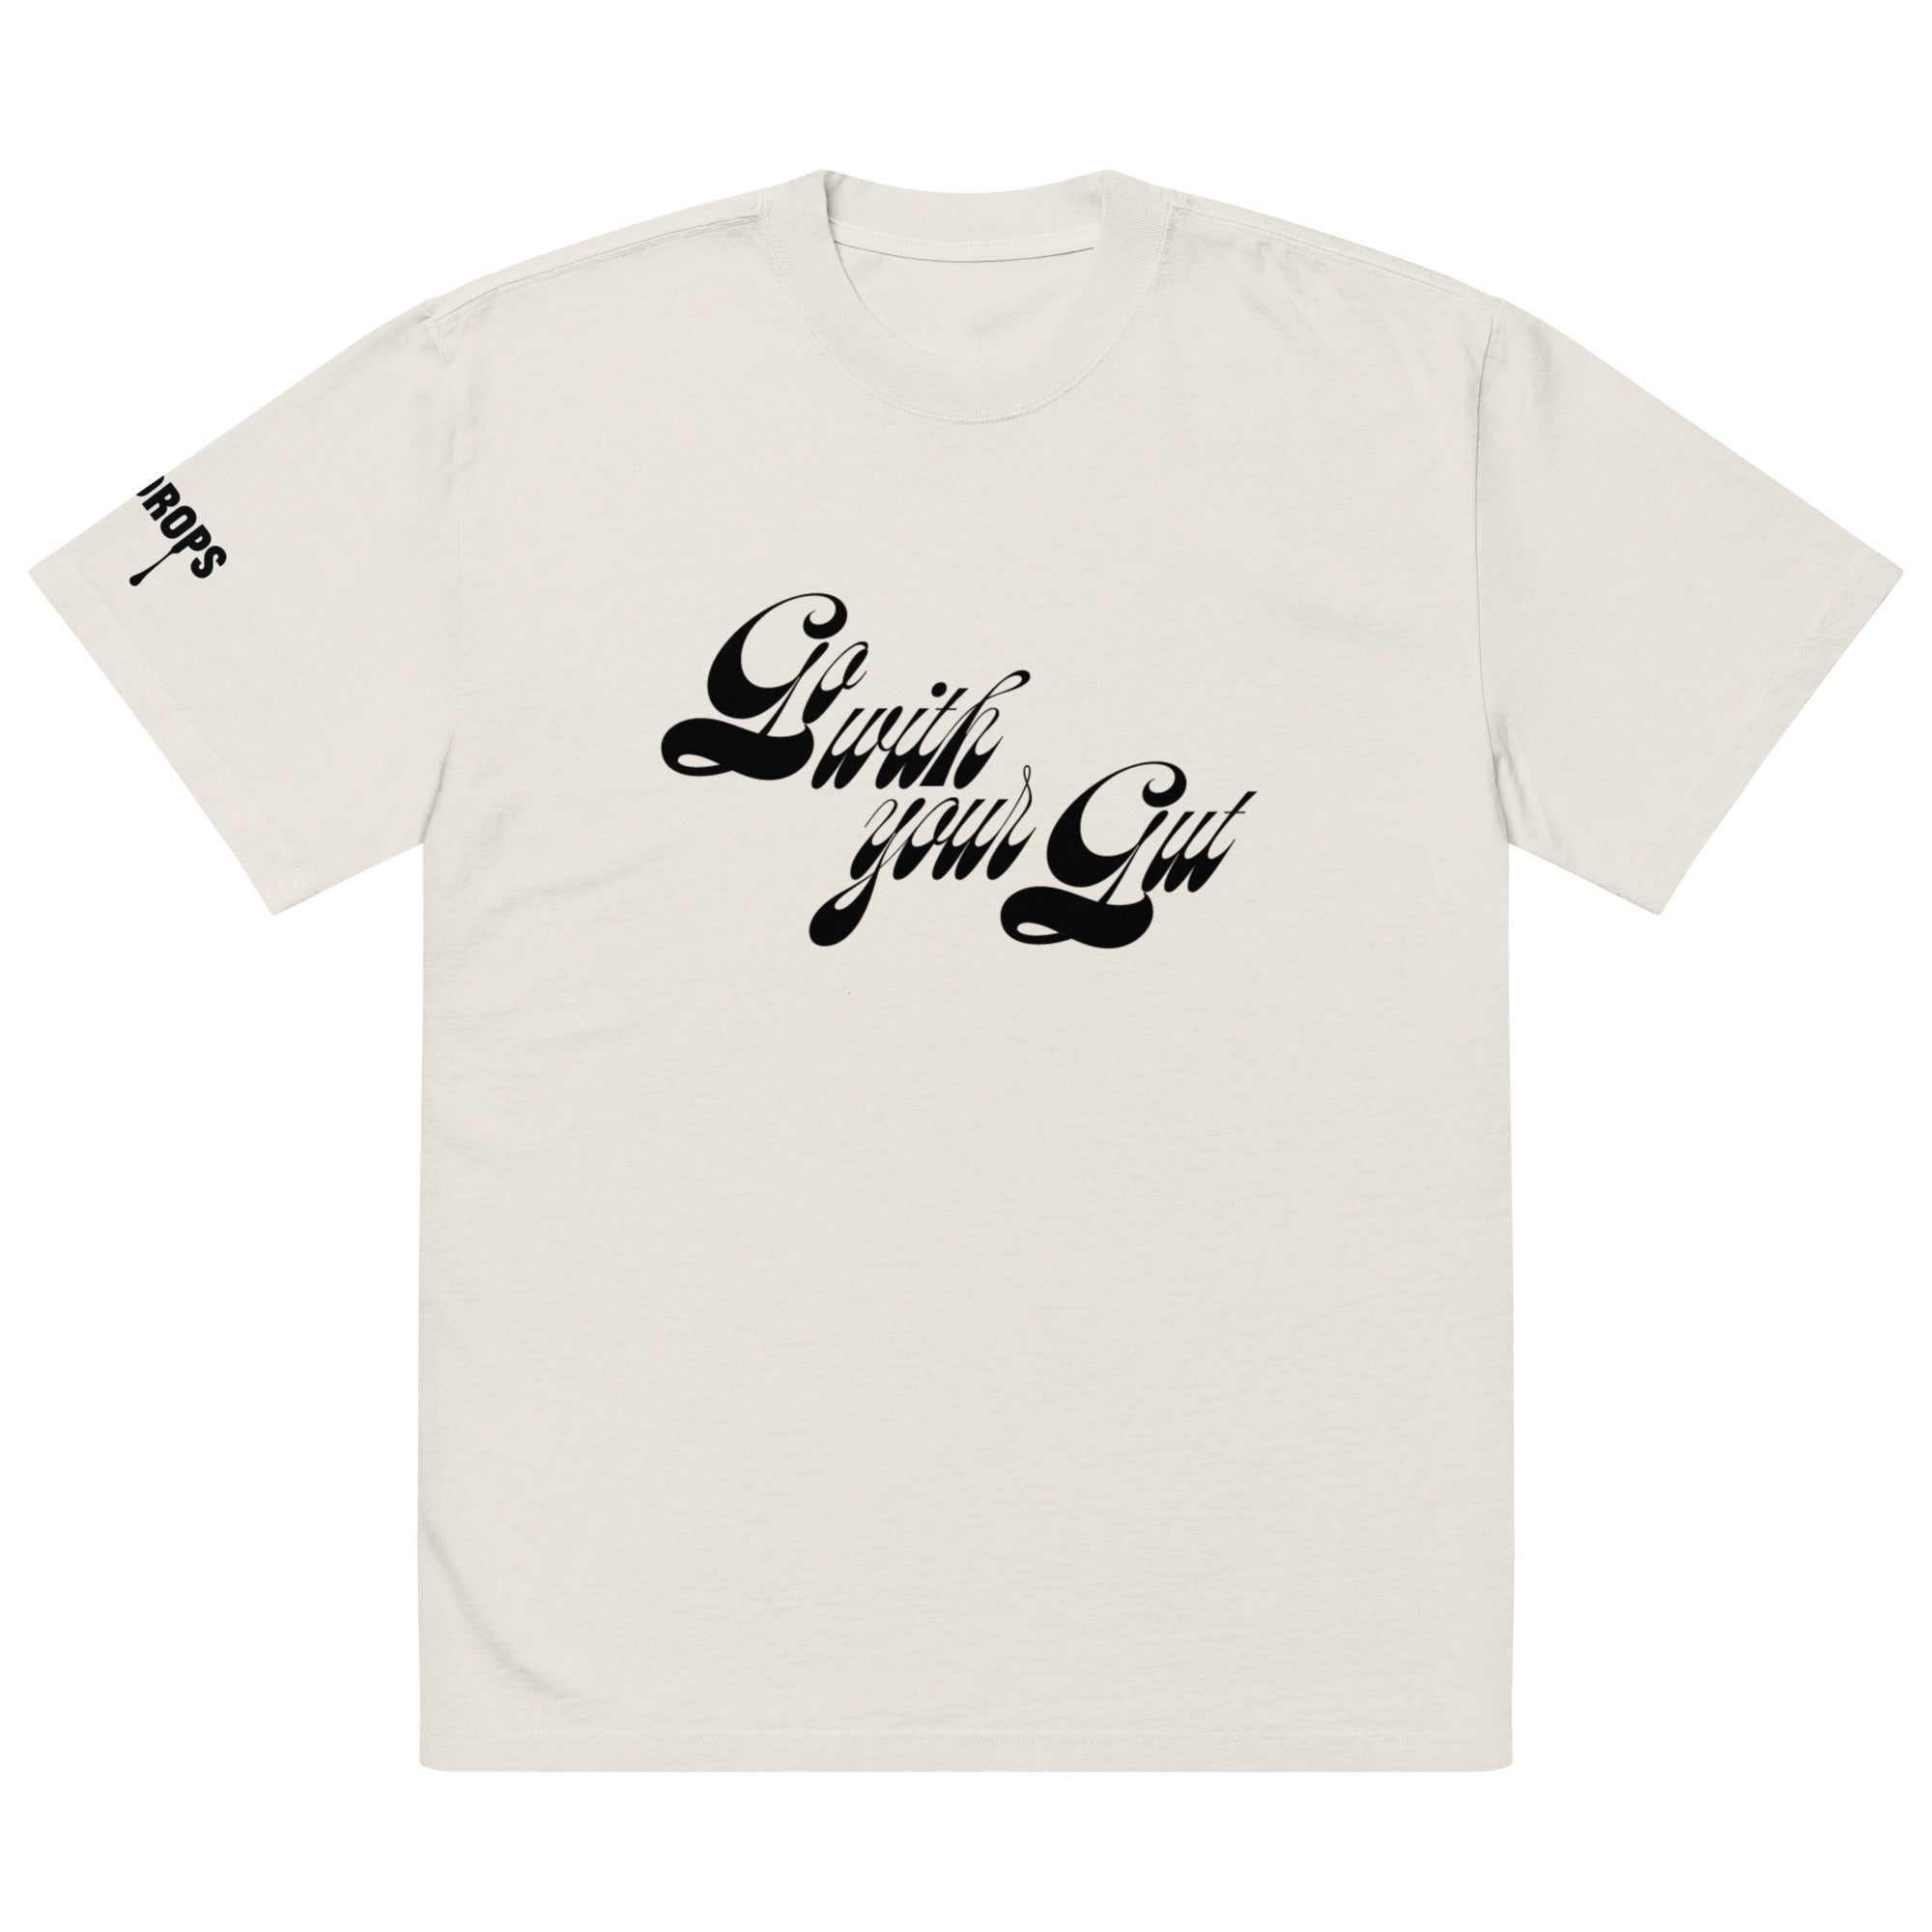 "Go with your Gut" t-shirt